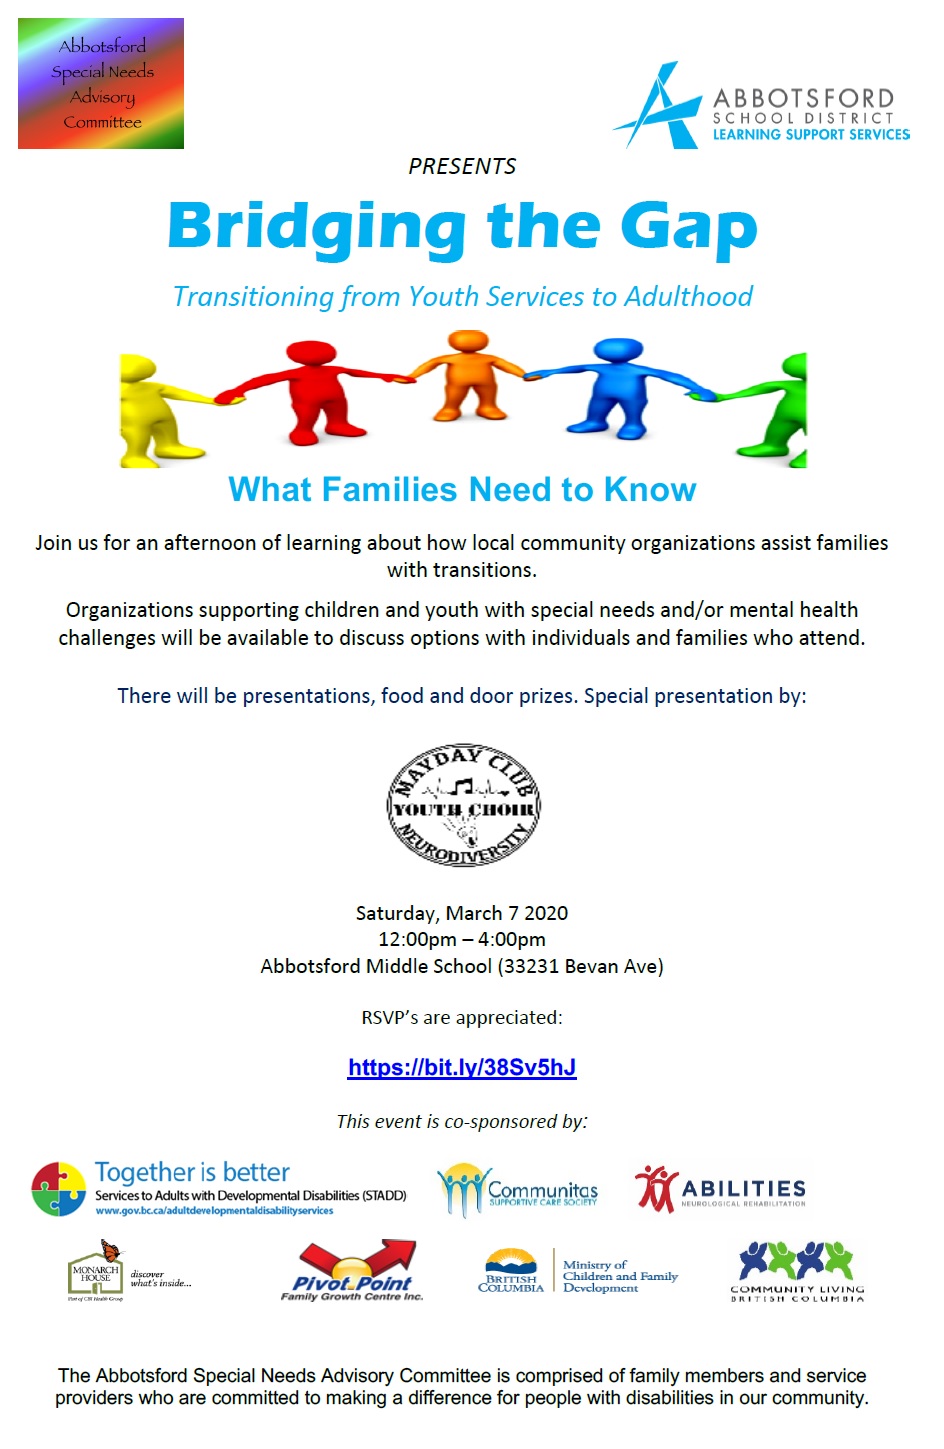 Transition Fair for families with children with special needs transitioning to adulthood